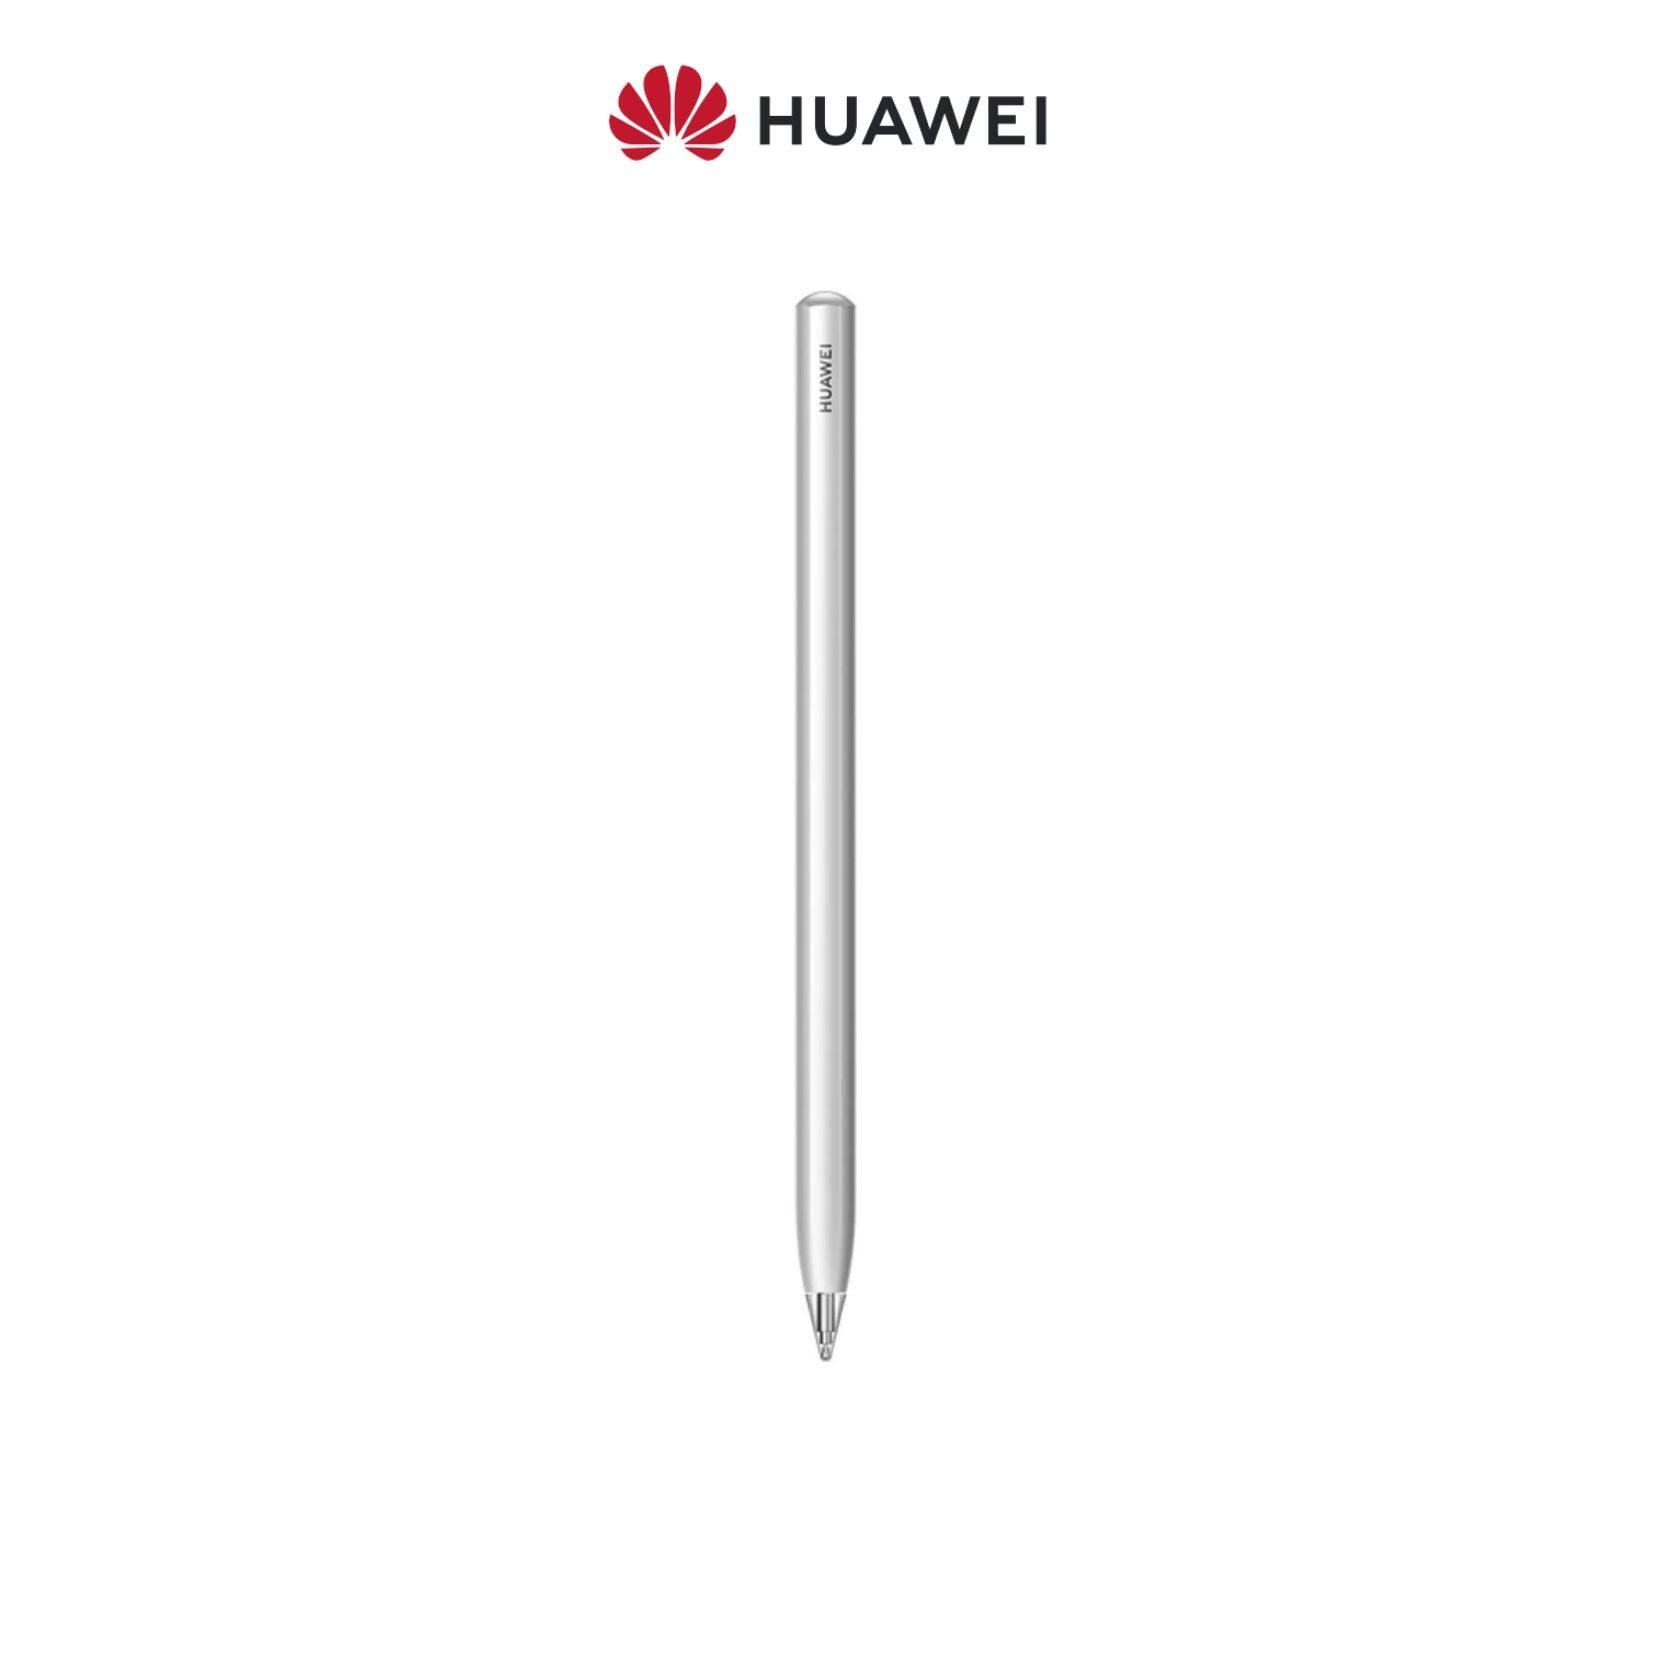 HUAWEI M Pencil Gen2 - Magnetic Attraction Wireless Charging [ For MatePad Pro 12.6, MatePad 11 ]